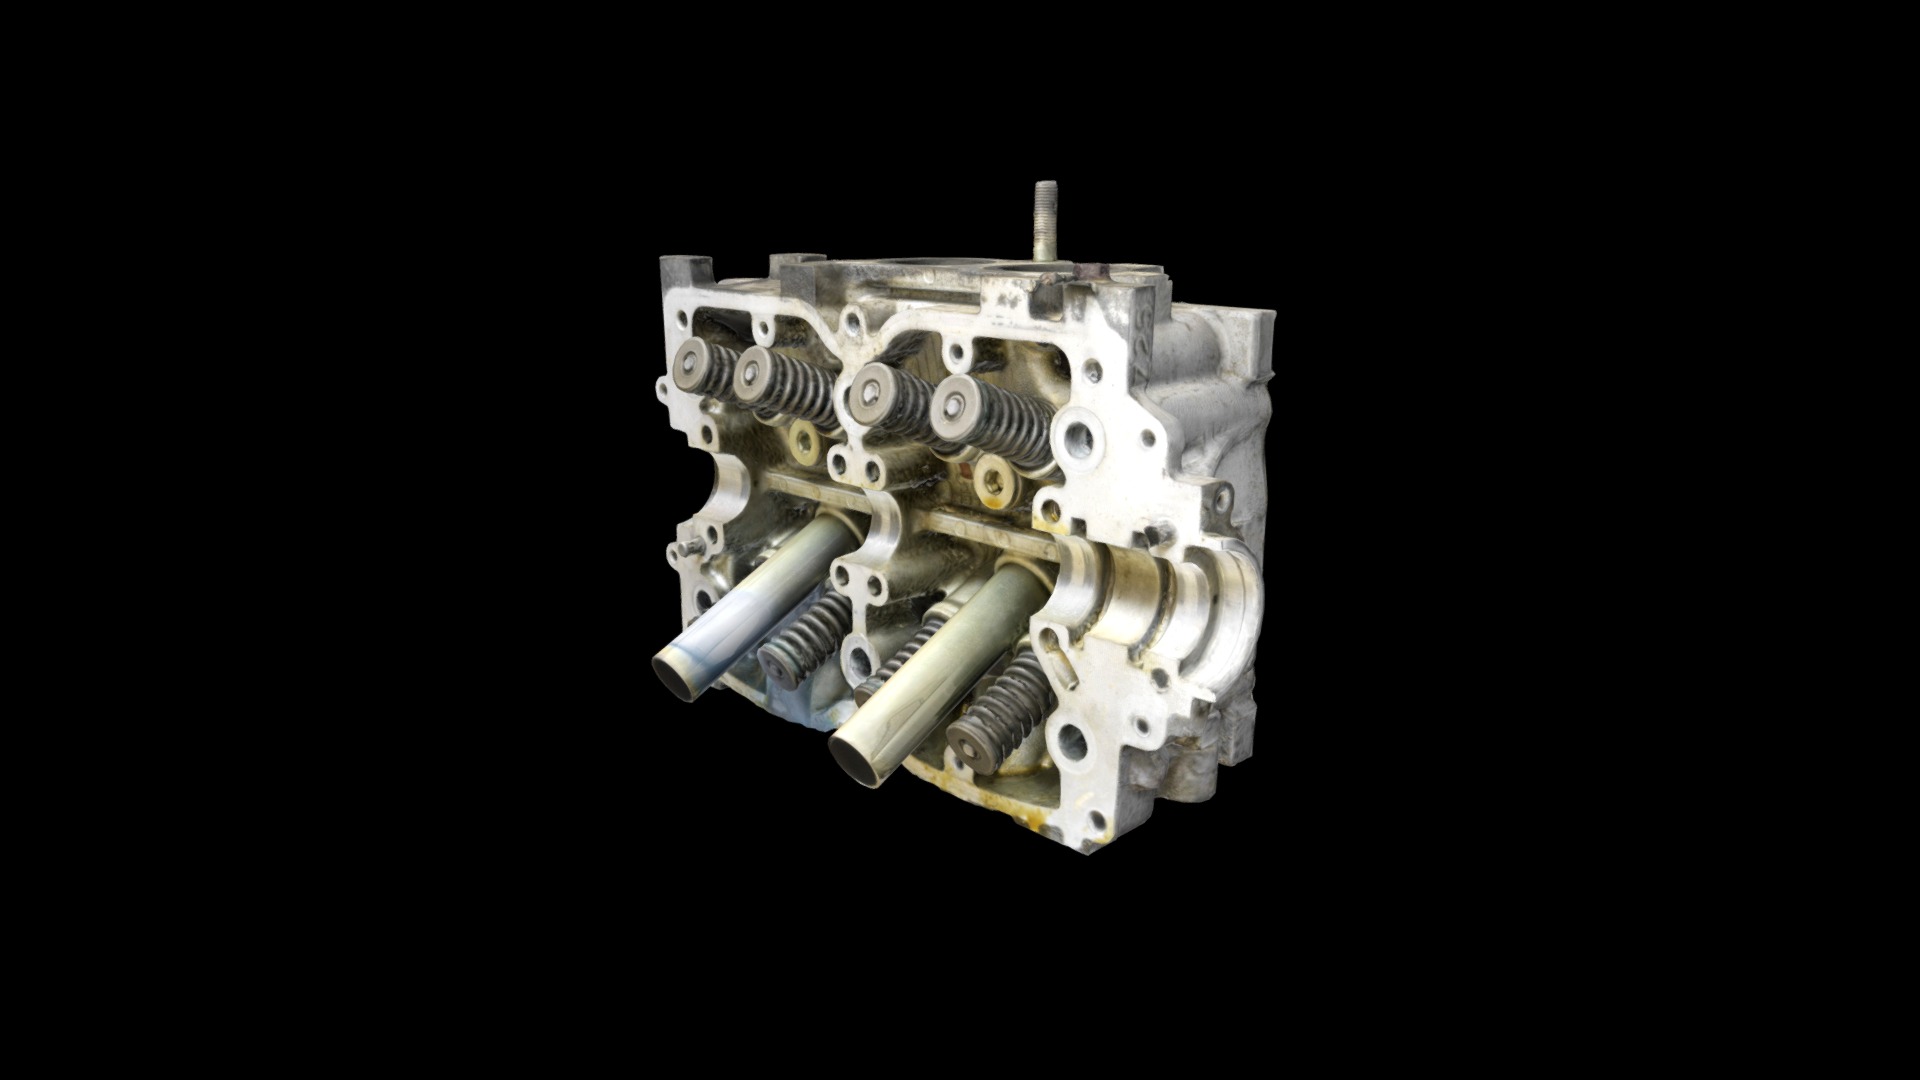 3D model Subaru Engine Head - This is a 3D model of the Subaru Engine Head. The 3D model is about a metal object with a hole in it.